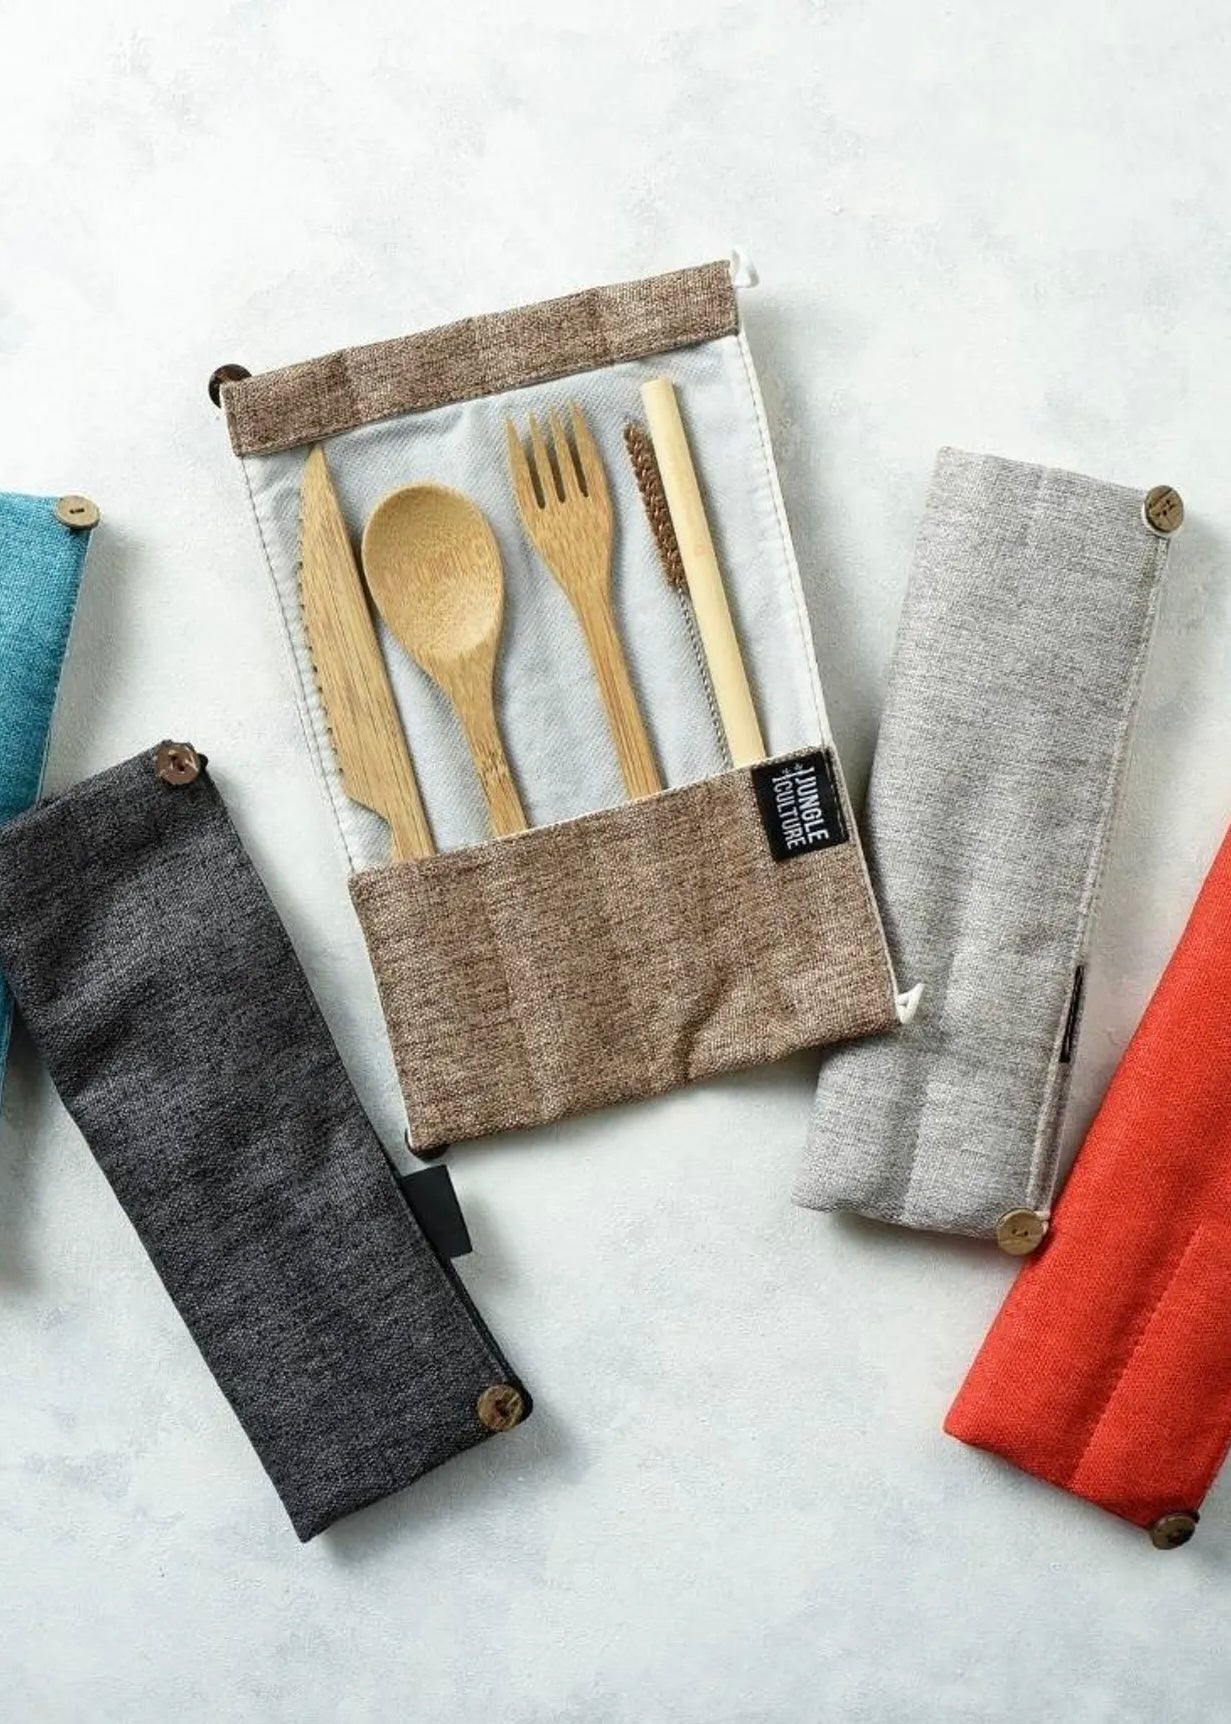 Jungle Culture Bamboo Cutlery Set (Brown) in Natural Cotton Pouch | Wooden Utensils